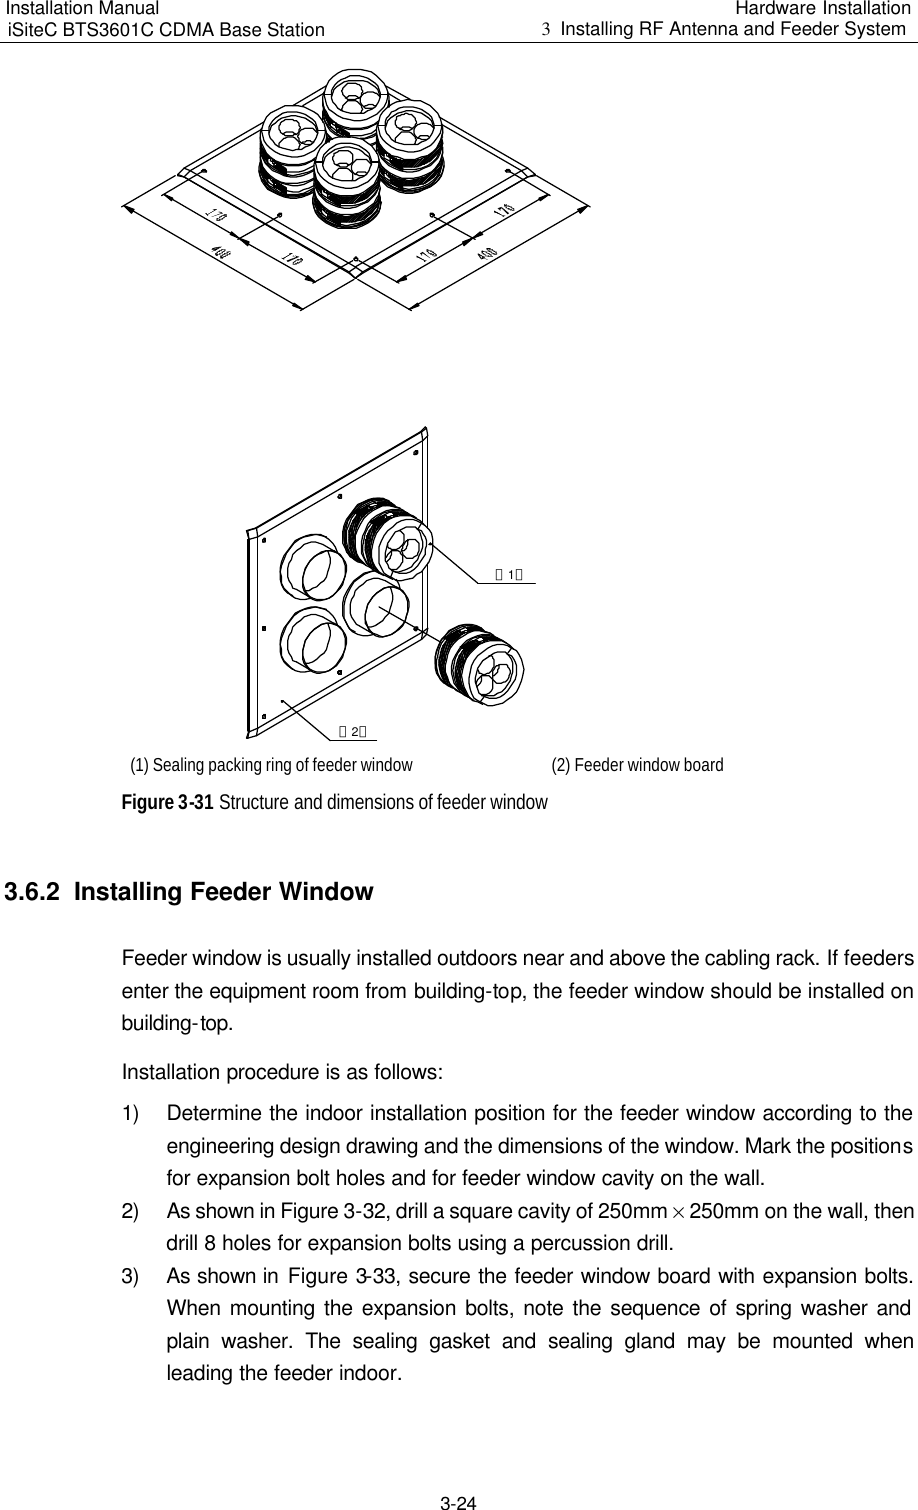 Installation Manual   iSiteC BTS3601C CDMA Base Station Hardware Installation 3  Installing RF Antenna and Feeder System  3-24 （1）（2） (1) Sealing packing ring of feeder window (2) Feeder window board Figure 3-31 Structure and dimensions of feeder window 3.6.2  Installing Feeder Window Feeder window is usually installed outdoors near and above the cabling rack. If feeders enter the equipment room from building-top, the feeder window should be installed on building-top. Installation procedure is as follows: 1) Determine the indoor installation position for the feeder window according to the engineering design drawing and the dimensions of the window. Mark the positions for expansion bolt holes and for feeder window cavity on the wall. 2) As shown in Figure 3-32, drill a square cavity of 250mm % 250mm on the wall, then drill 8 holes for expansion bolts using a percussion drill. 3) As shown in Figure 3-33, secure the feeder window board with expansion bolts. When mounting the expansion bolts, note the sequence of spring washer and plain washer. The sealing gasket and sealing gland may be mounted when leading the feeder indoor. 